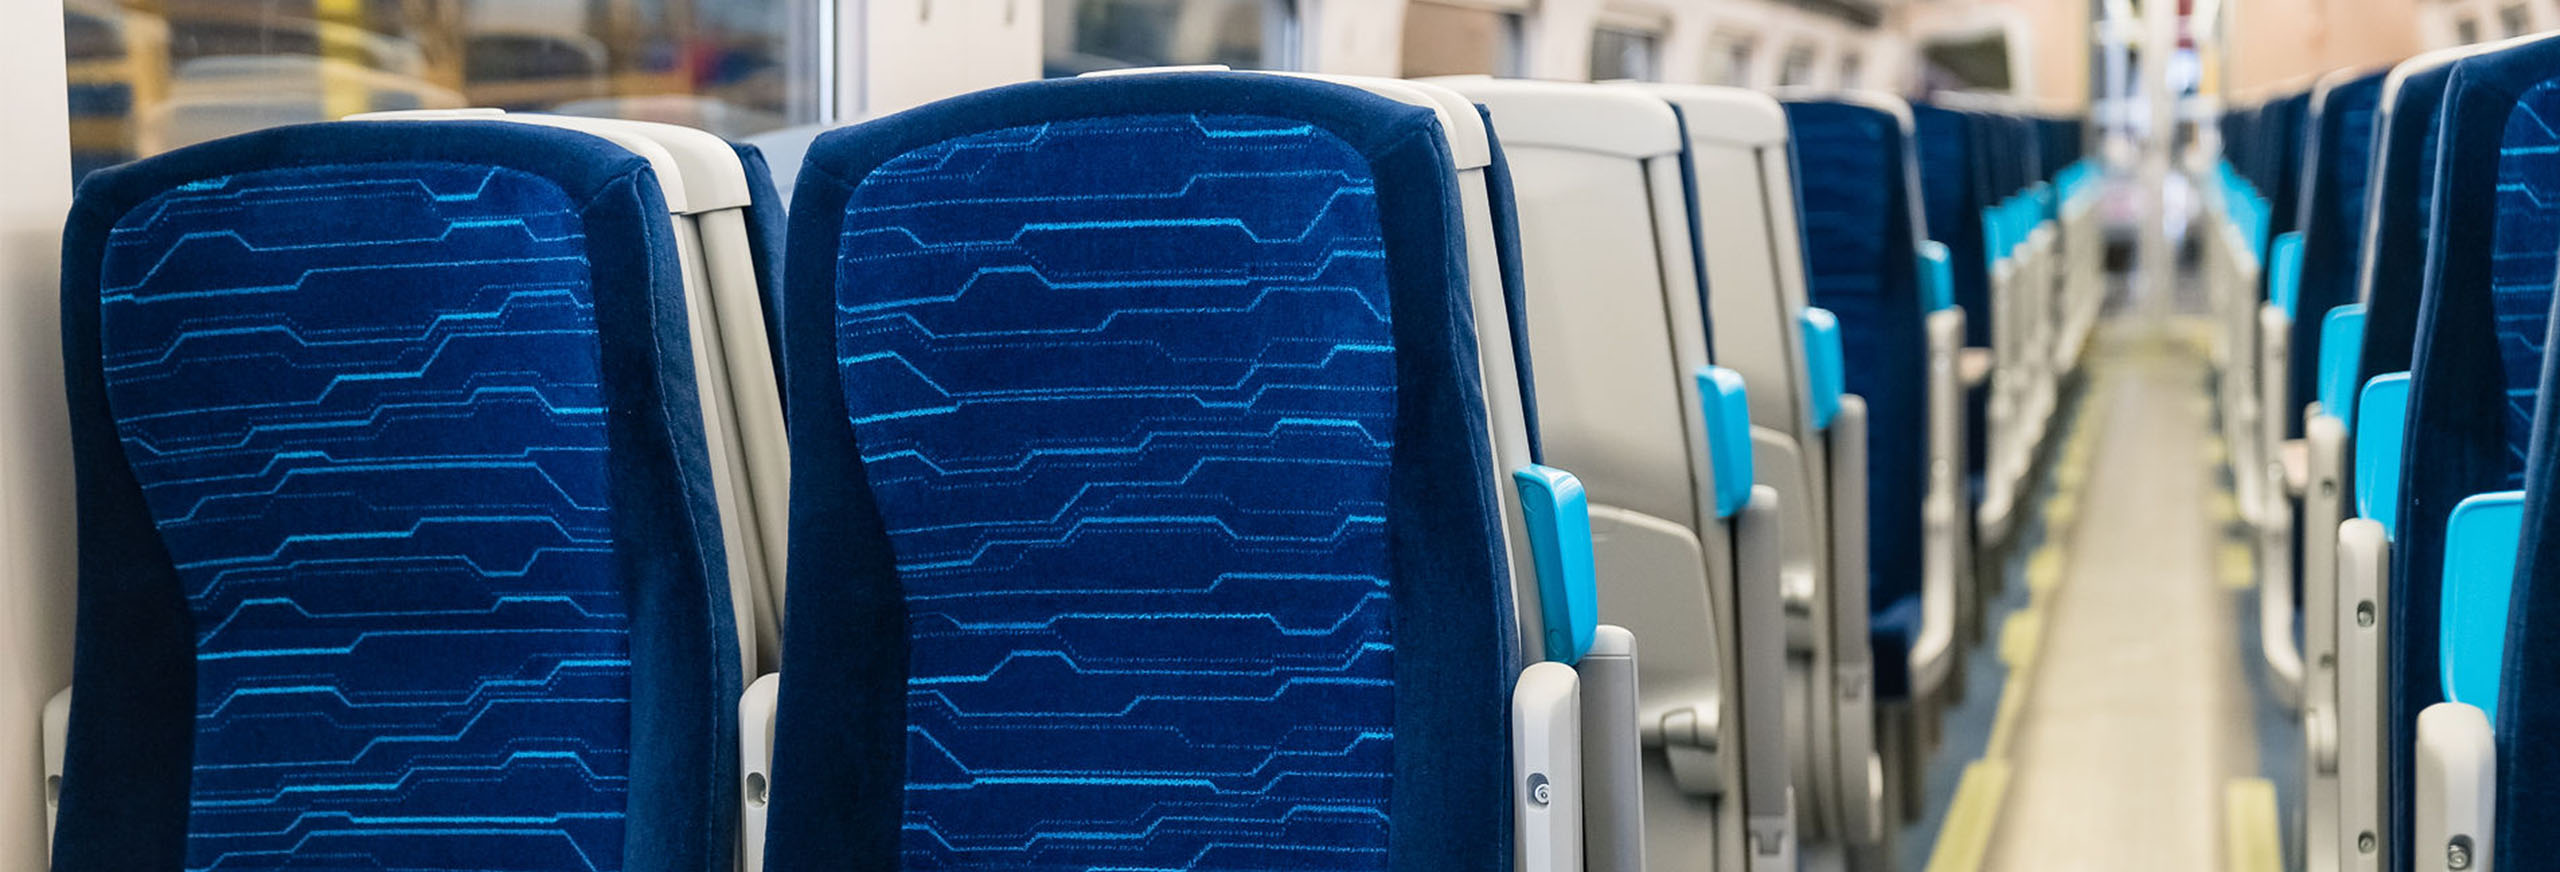 Hull Trains' new interiors in Pistoia, Italy